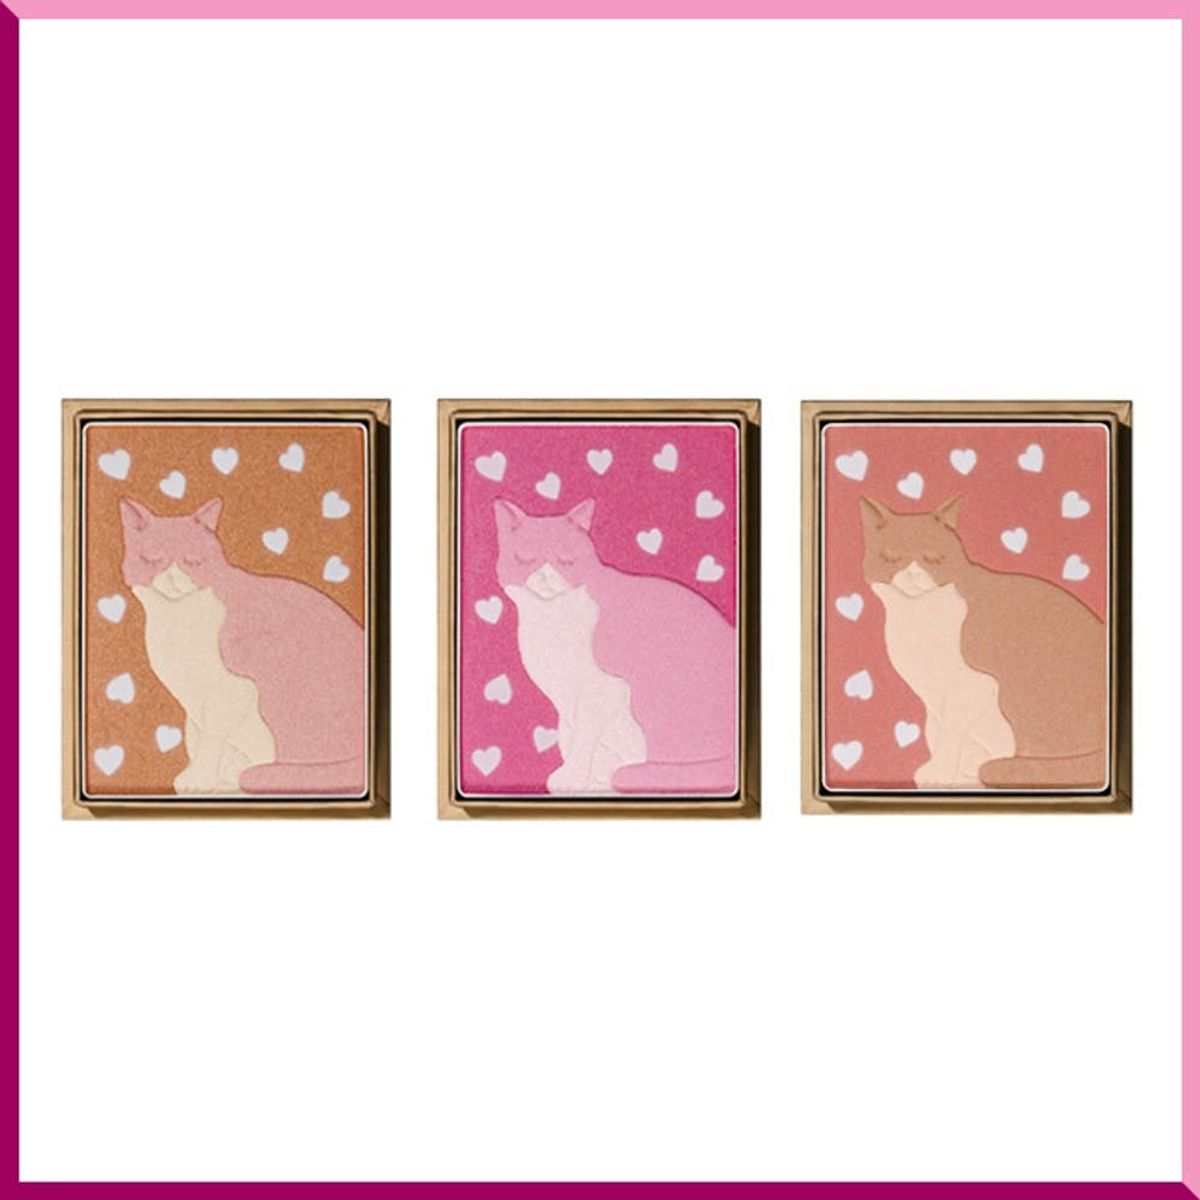 Get Your Cat Lady on With These Purr-fect Makeup Palettes